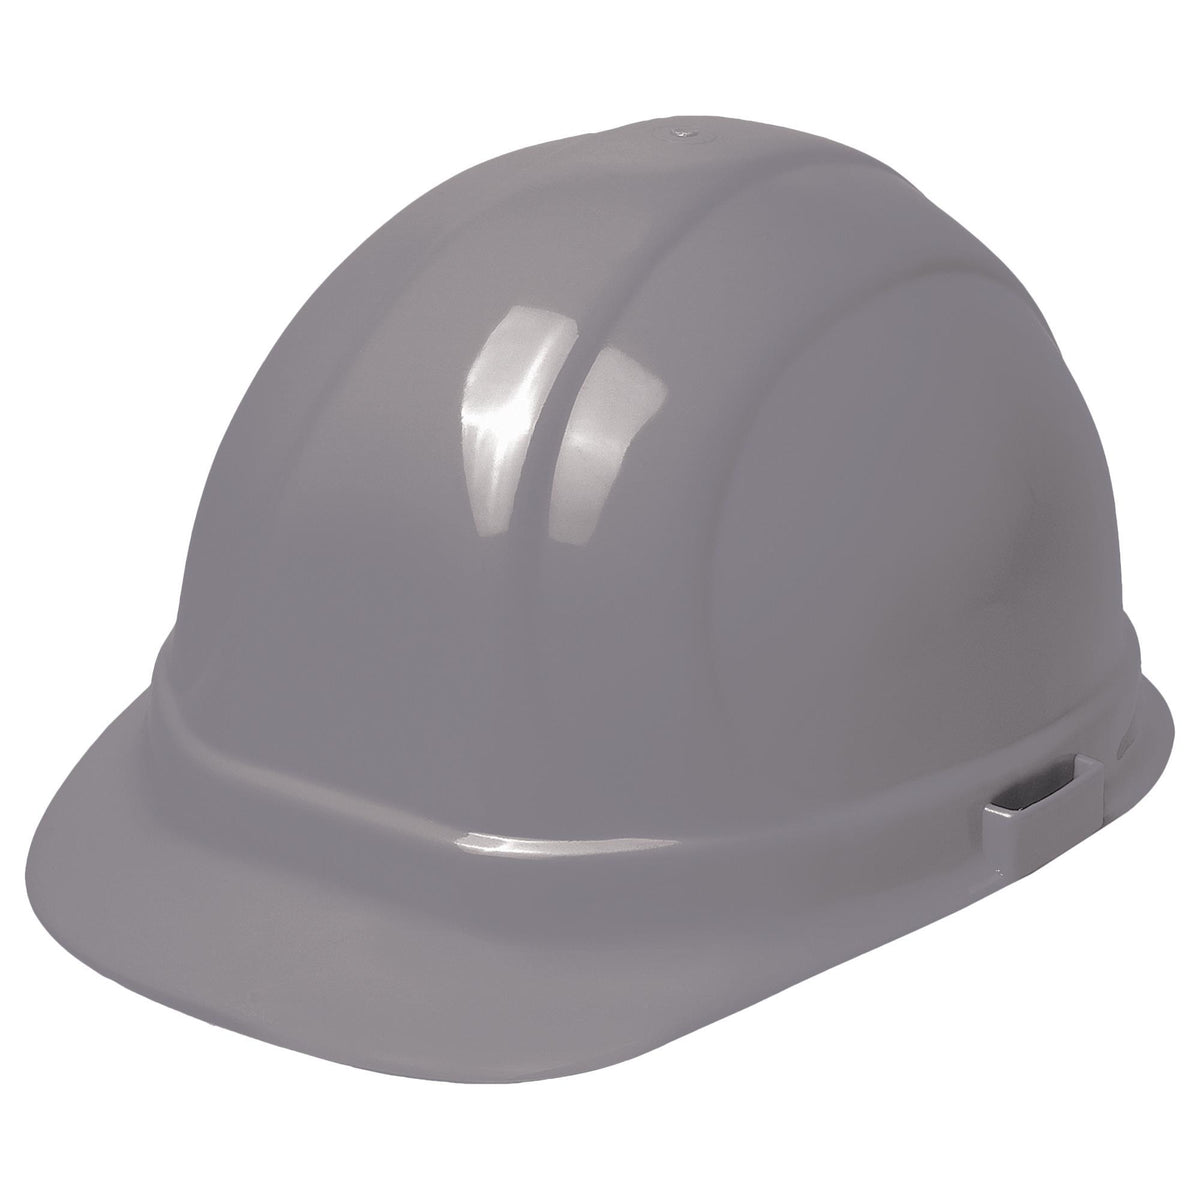 Omega II® Cap with Accessory Slots and 6-Point Slide-Lock Suspension 1pc